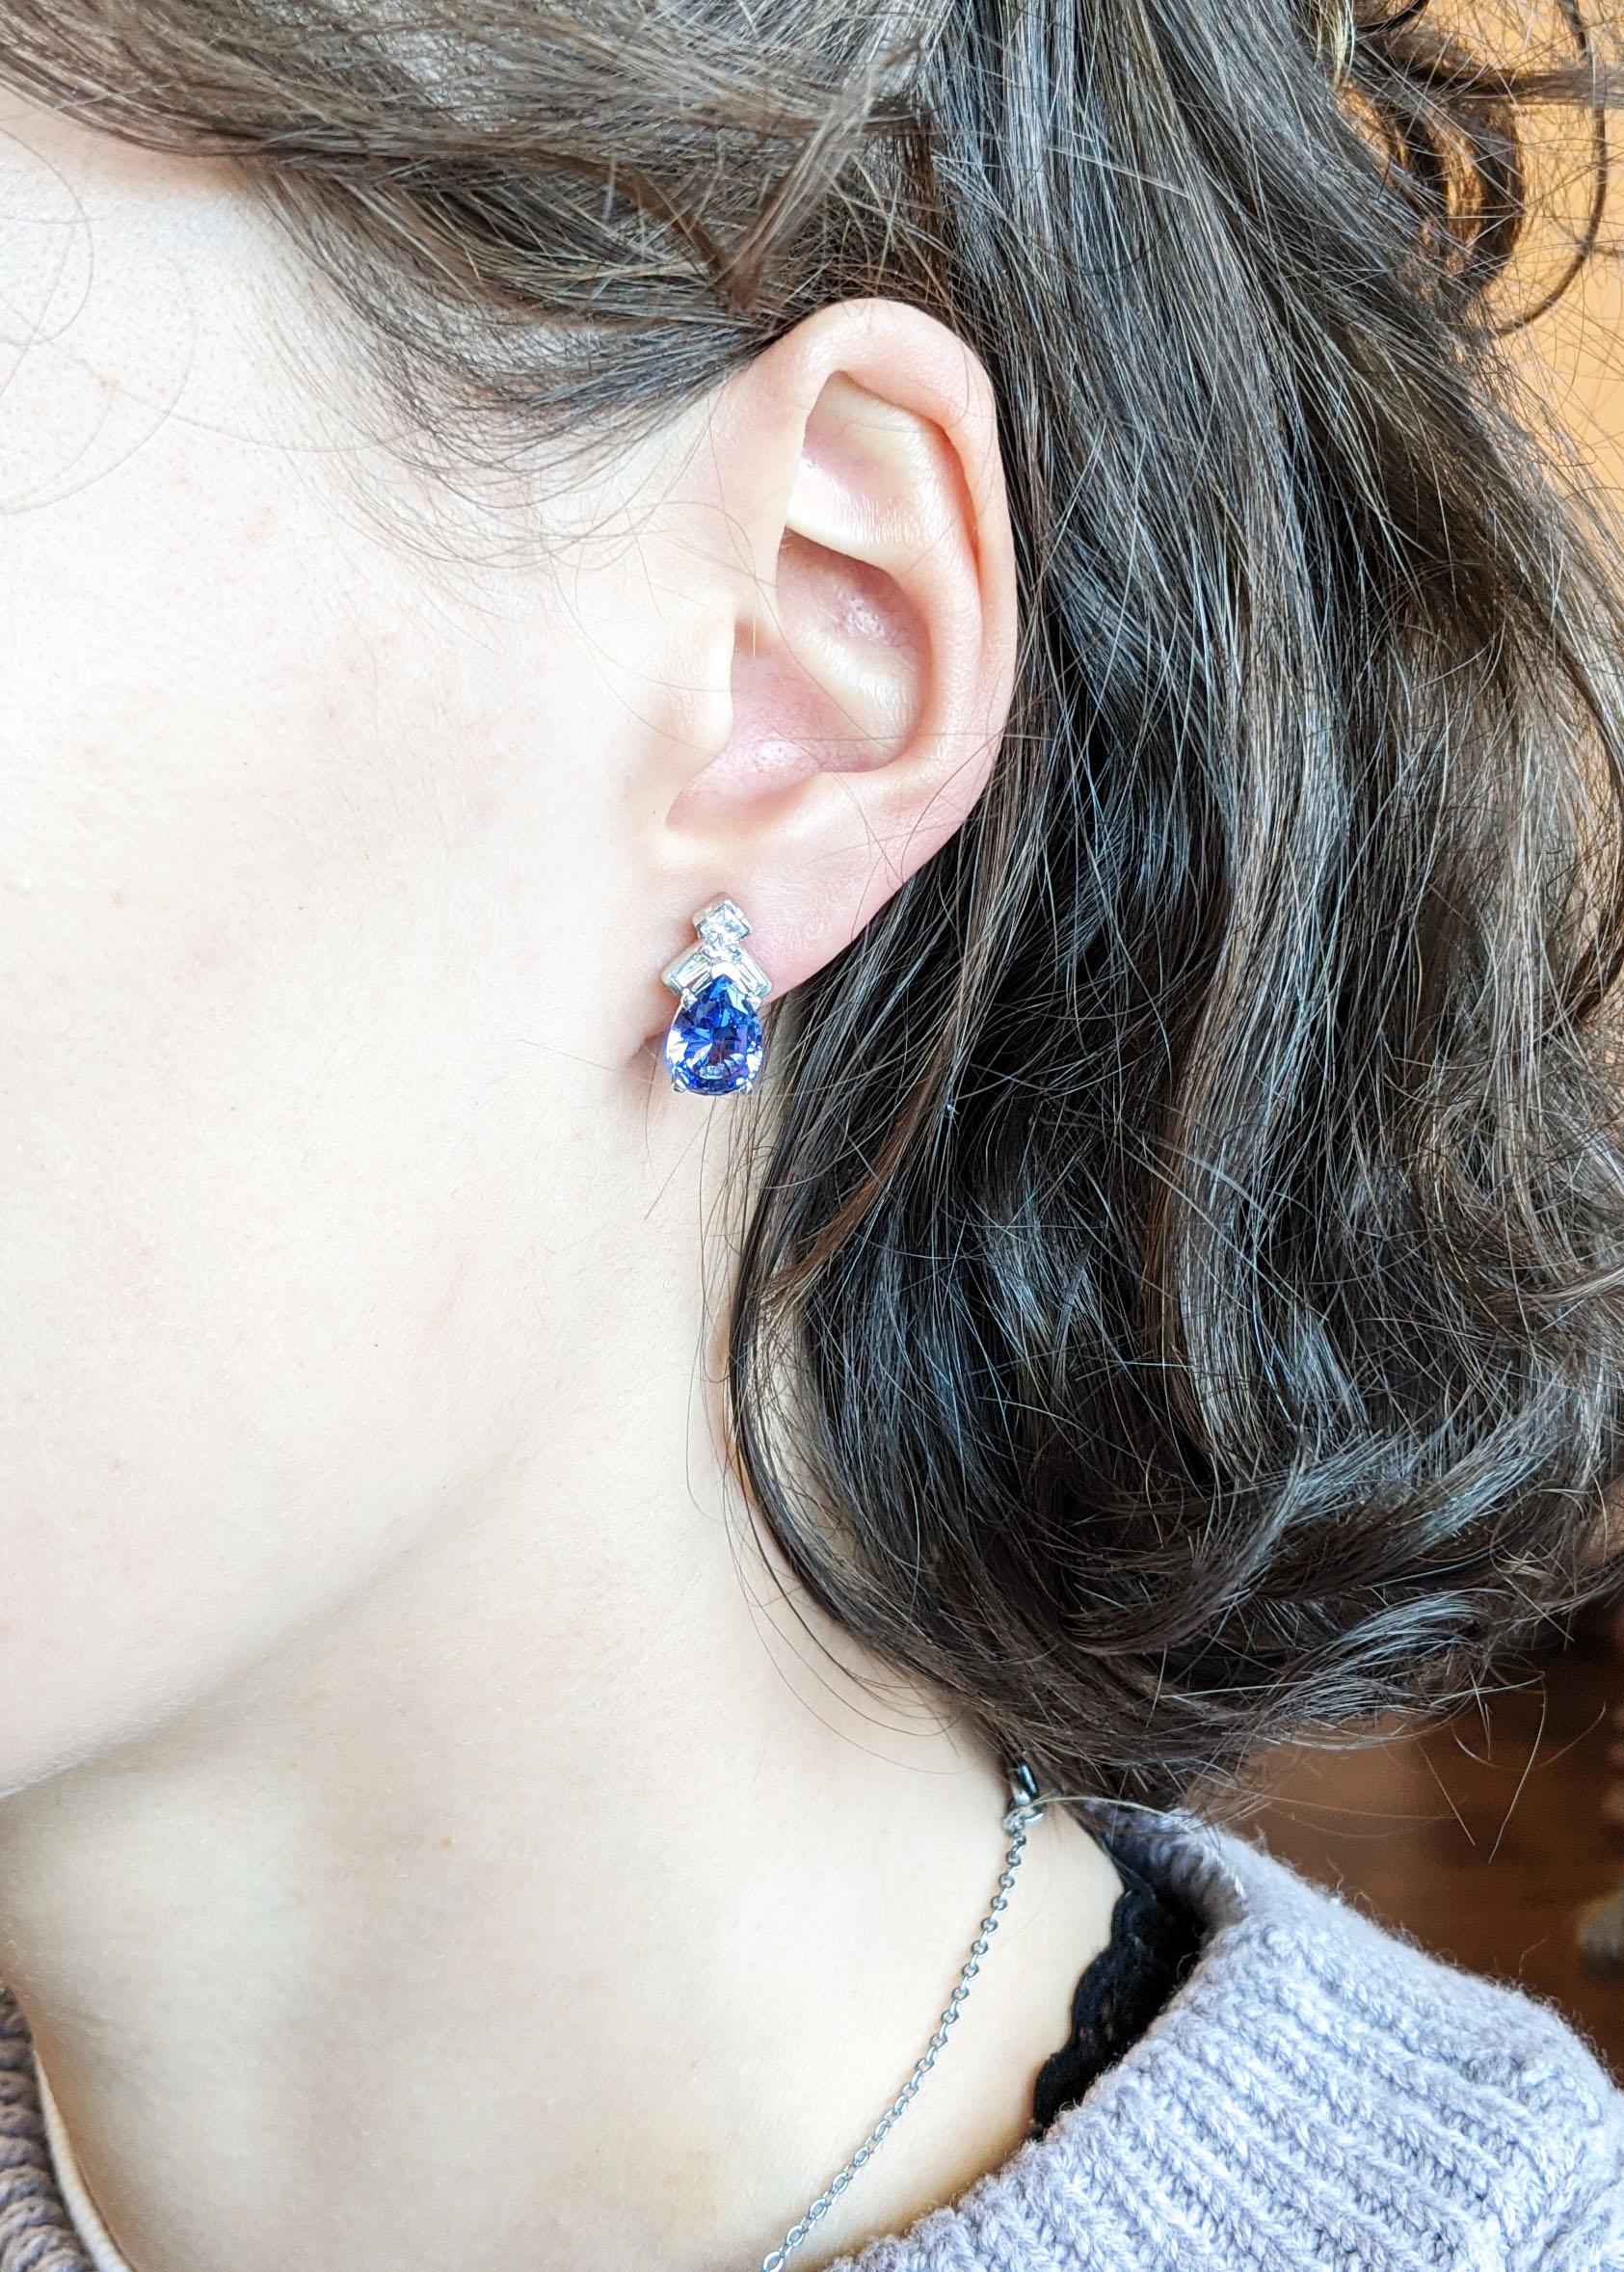 This is a gorgeous pair of stud earrings in 14k white gold with breathtaking pear-shaped purple and blue tanzanite centers. Each earring is accented with a square-cut diamond and two baguette diamonds that provide the perfect amount of sparkle to